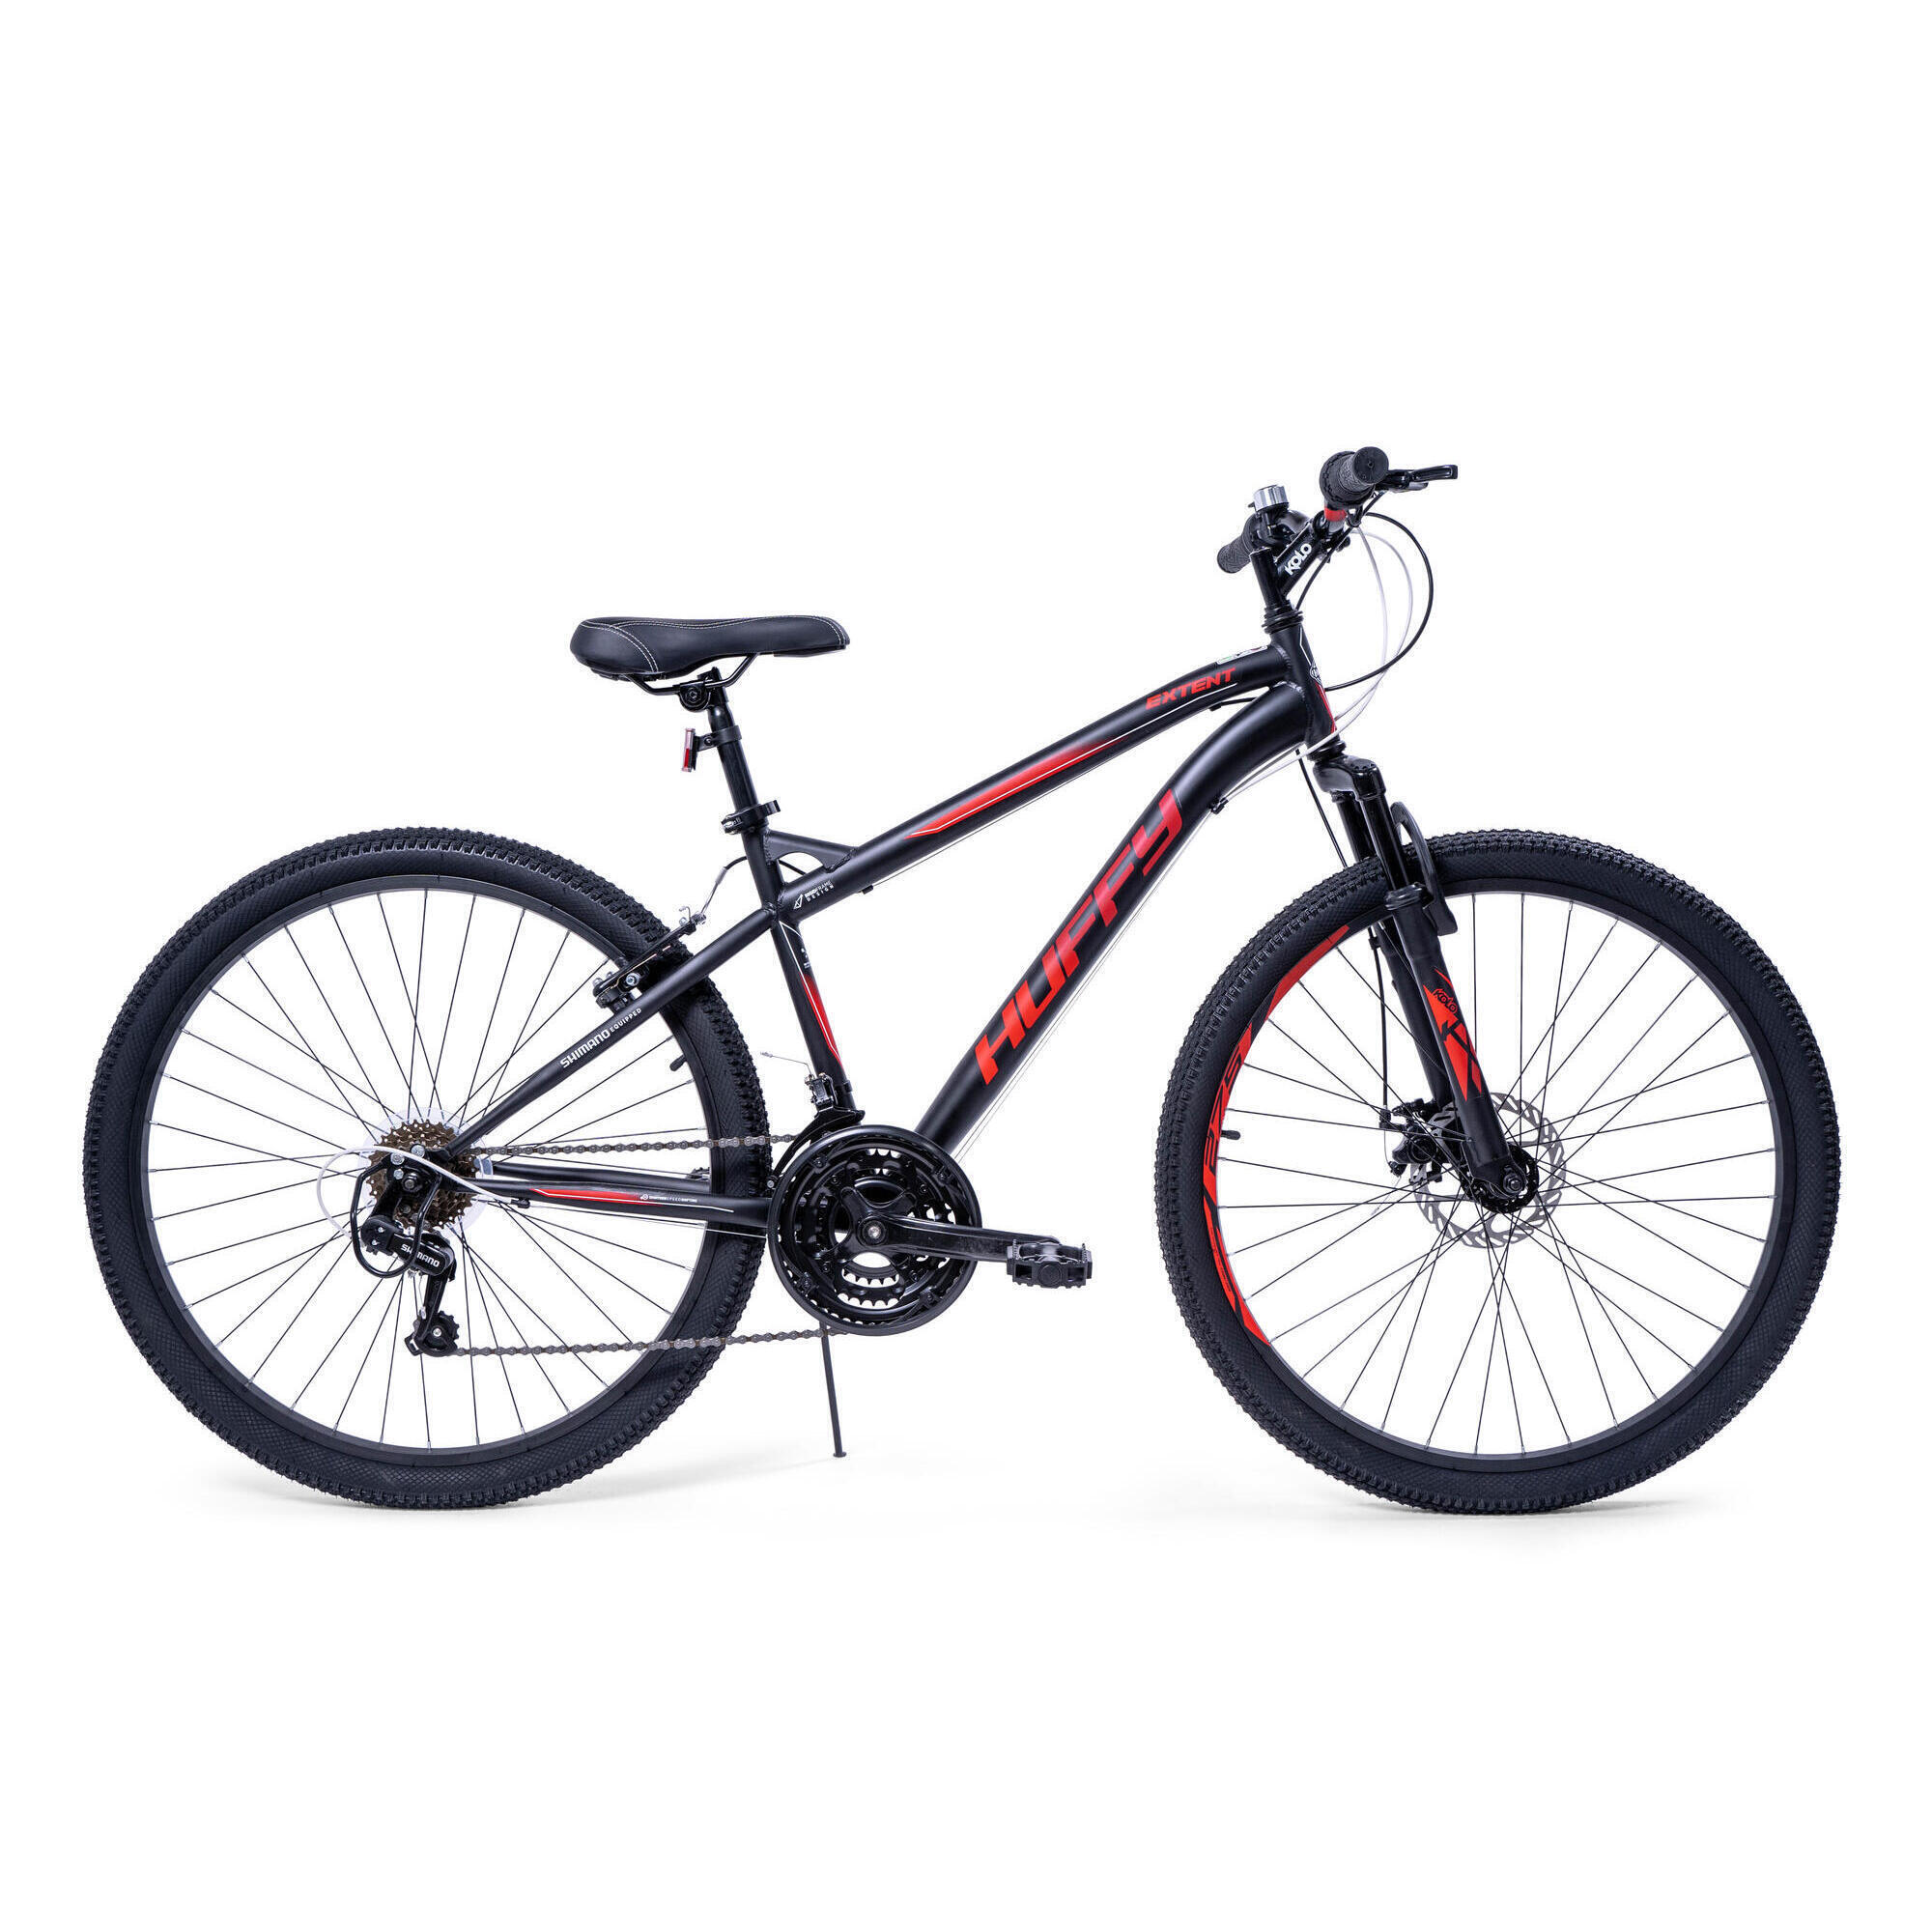 Huffy Extent Mens Mountain Bike 27.5" Wheels 18 Speed Black + Red 2/5